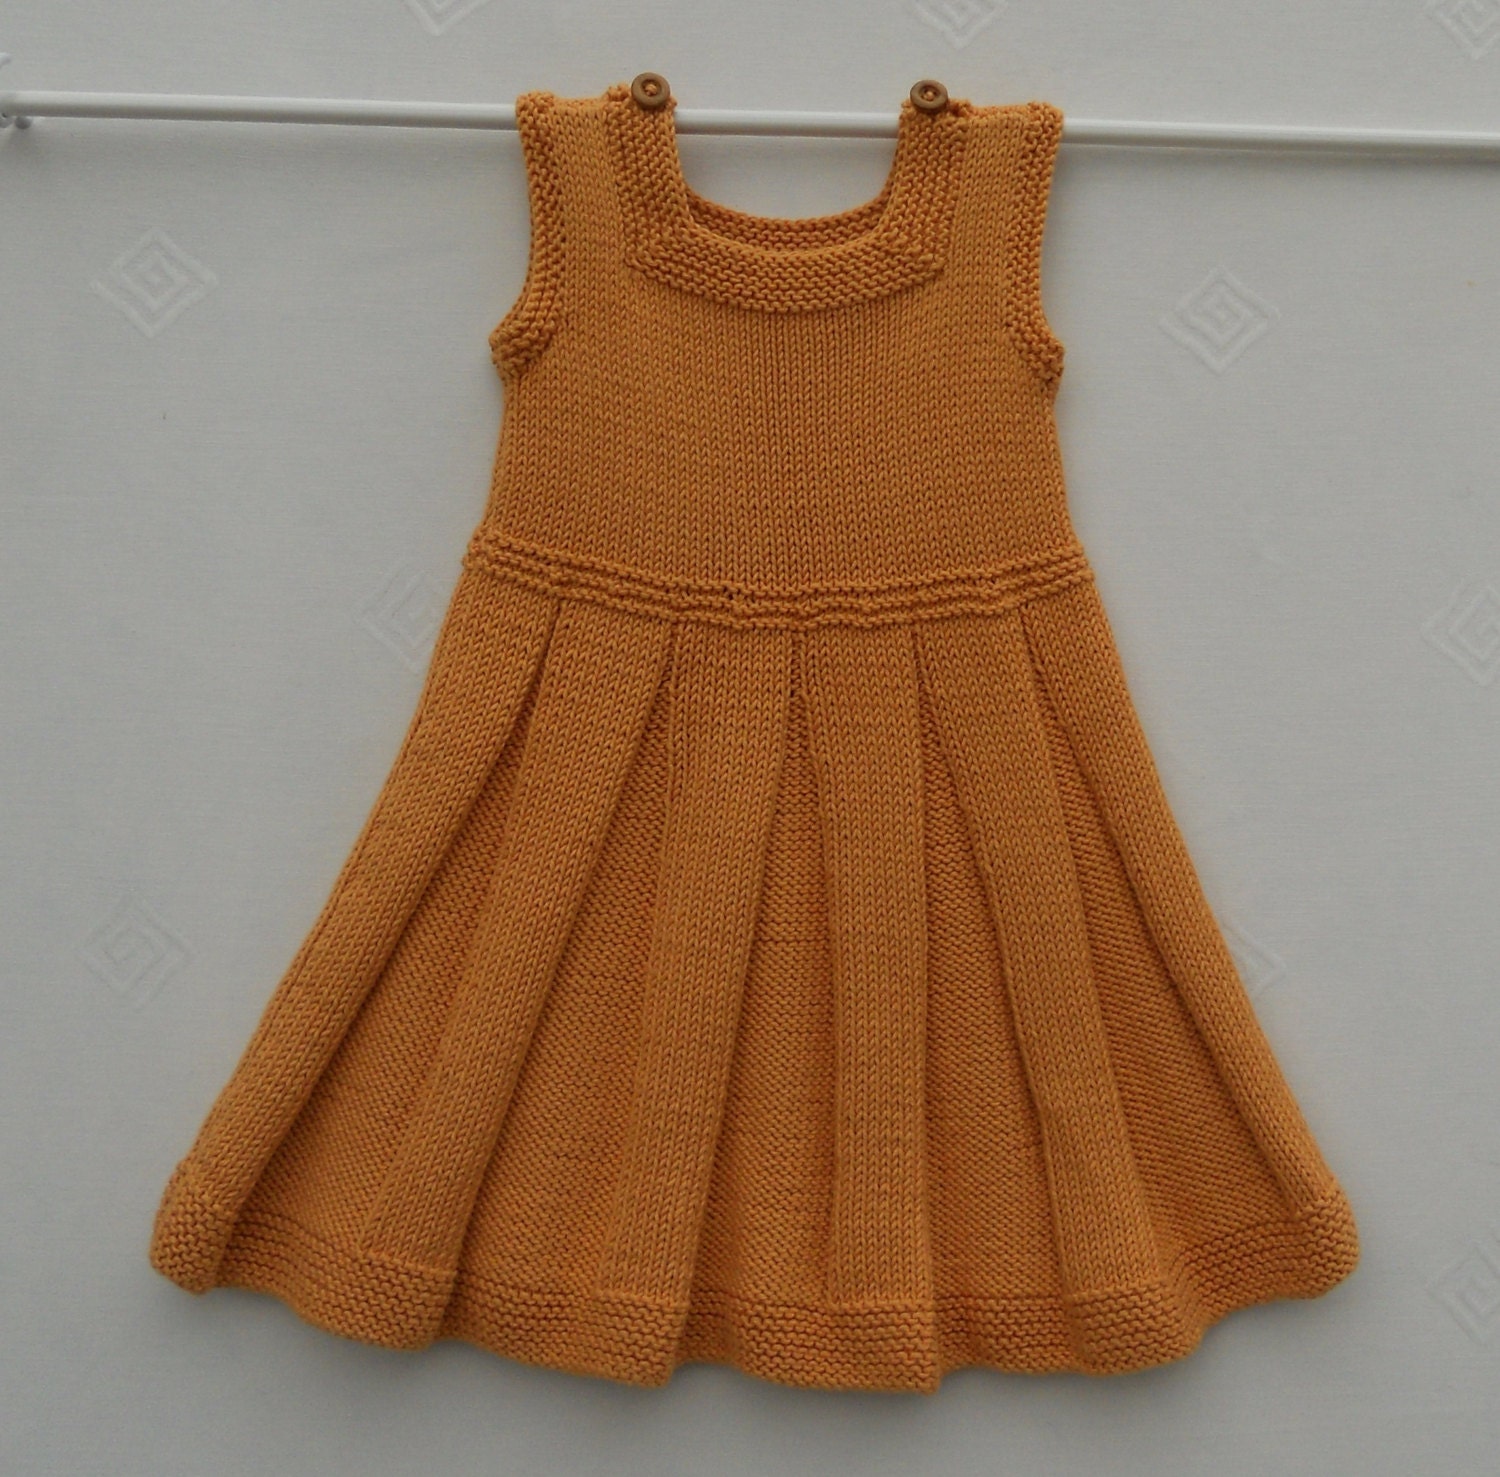 Baby girl/toddler dress or pinafore hand knitted in by ...